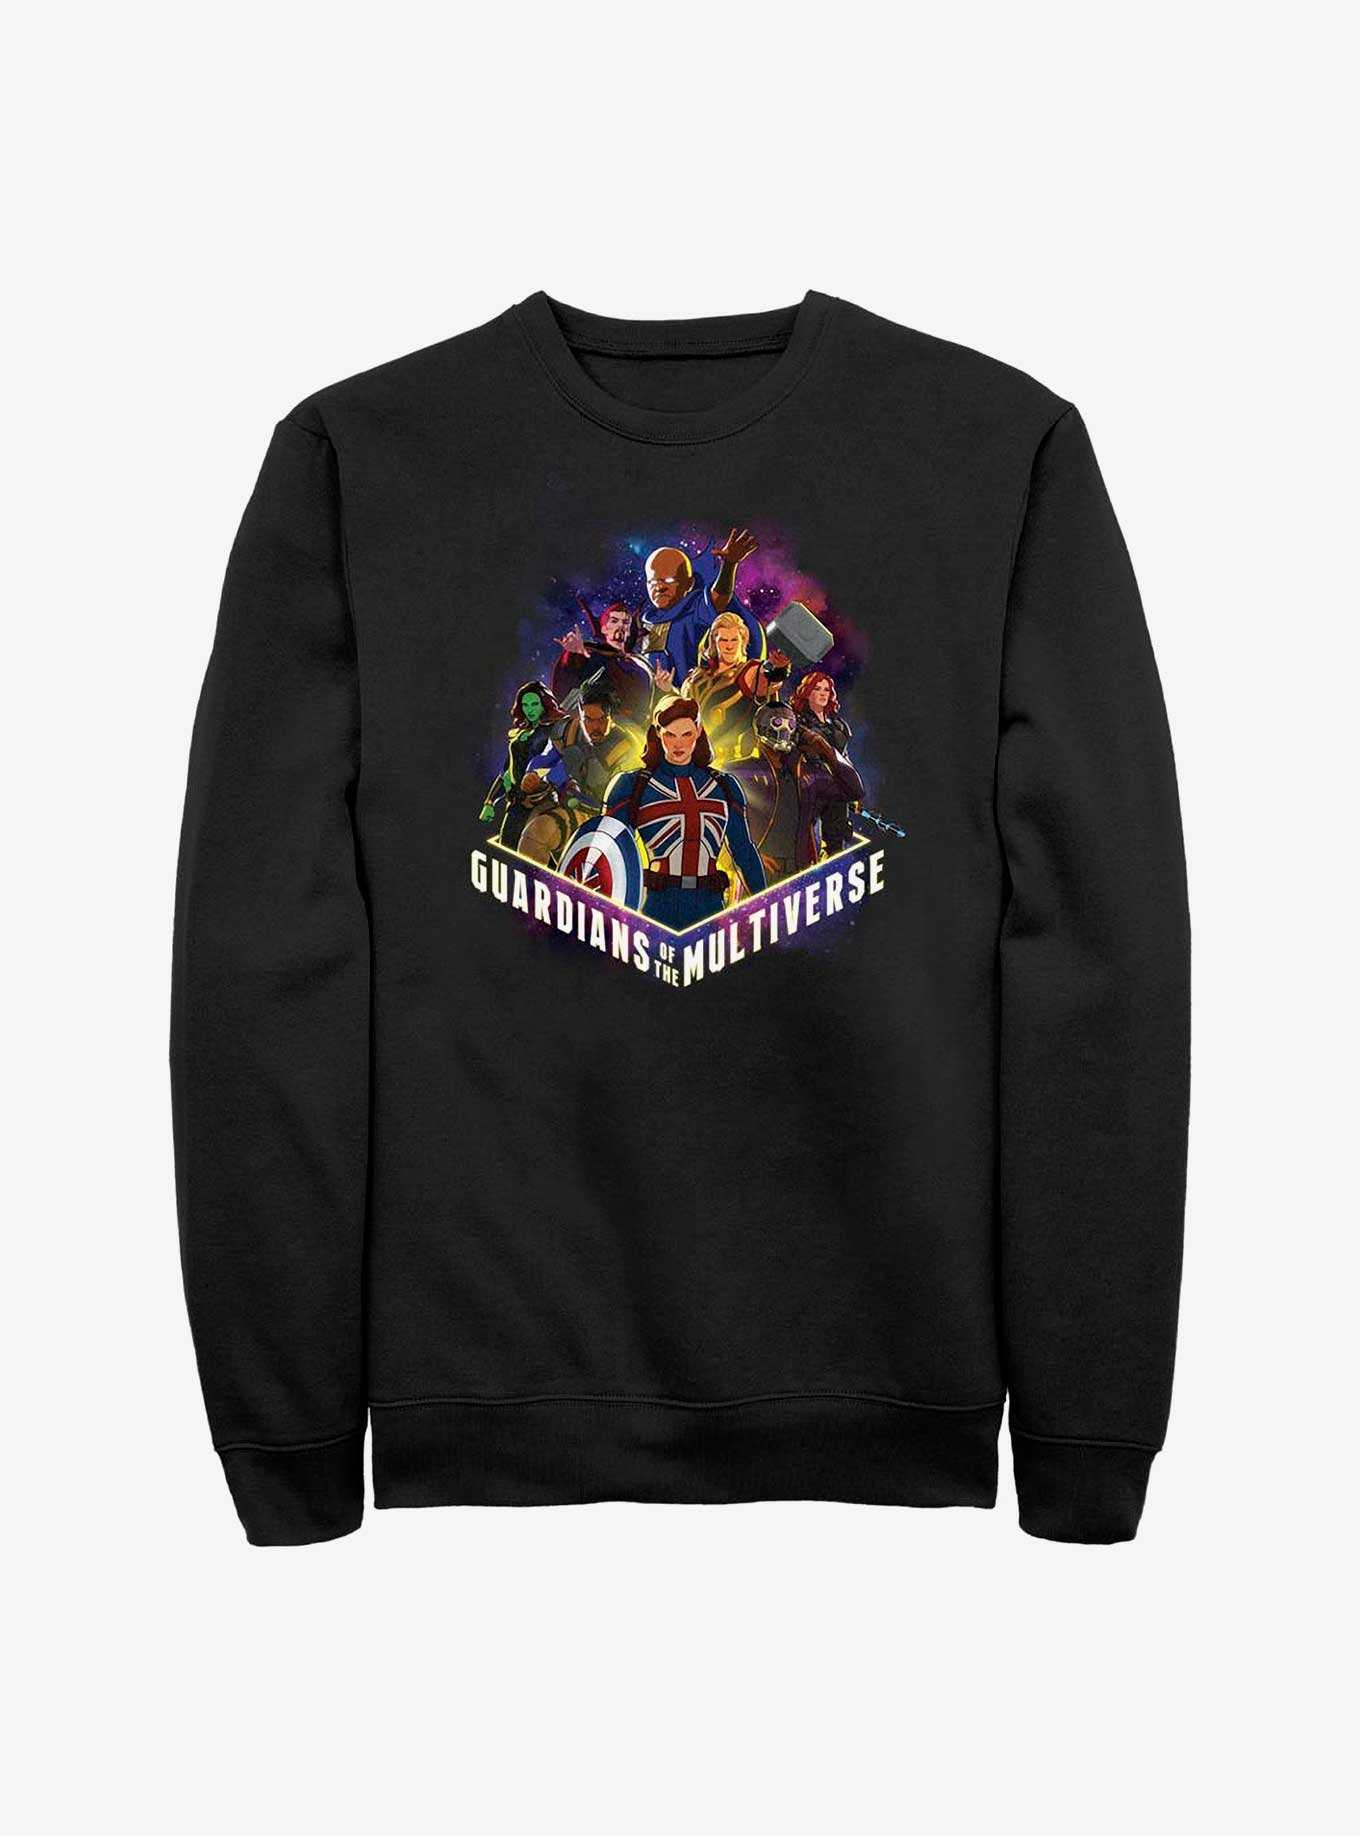 What If...? Guardians Of The Multiverse Poster Sweatshirt, , hi-res